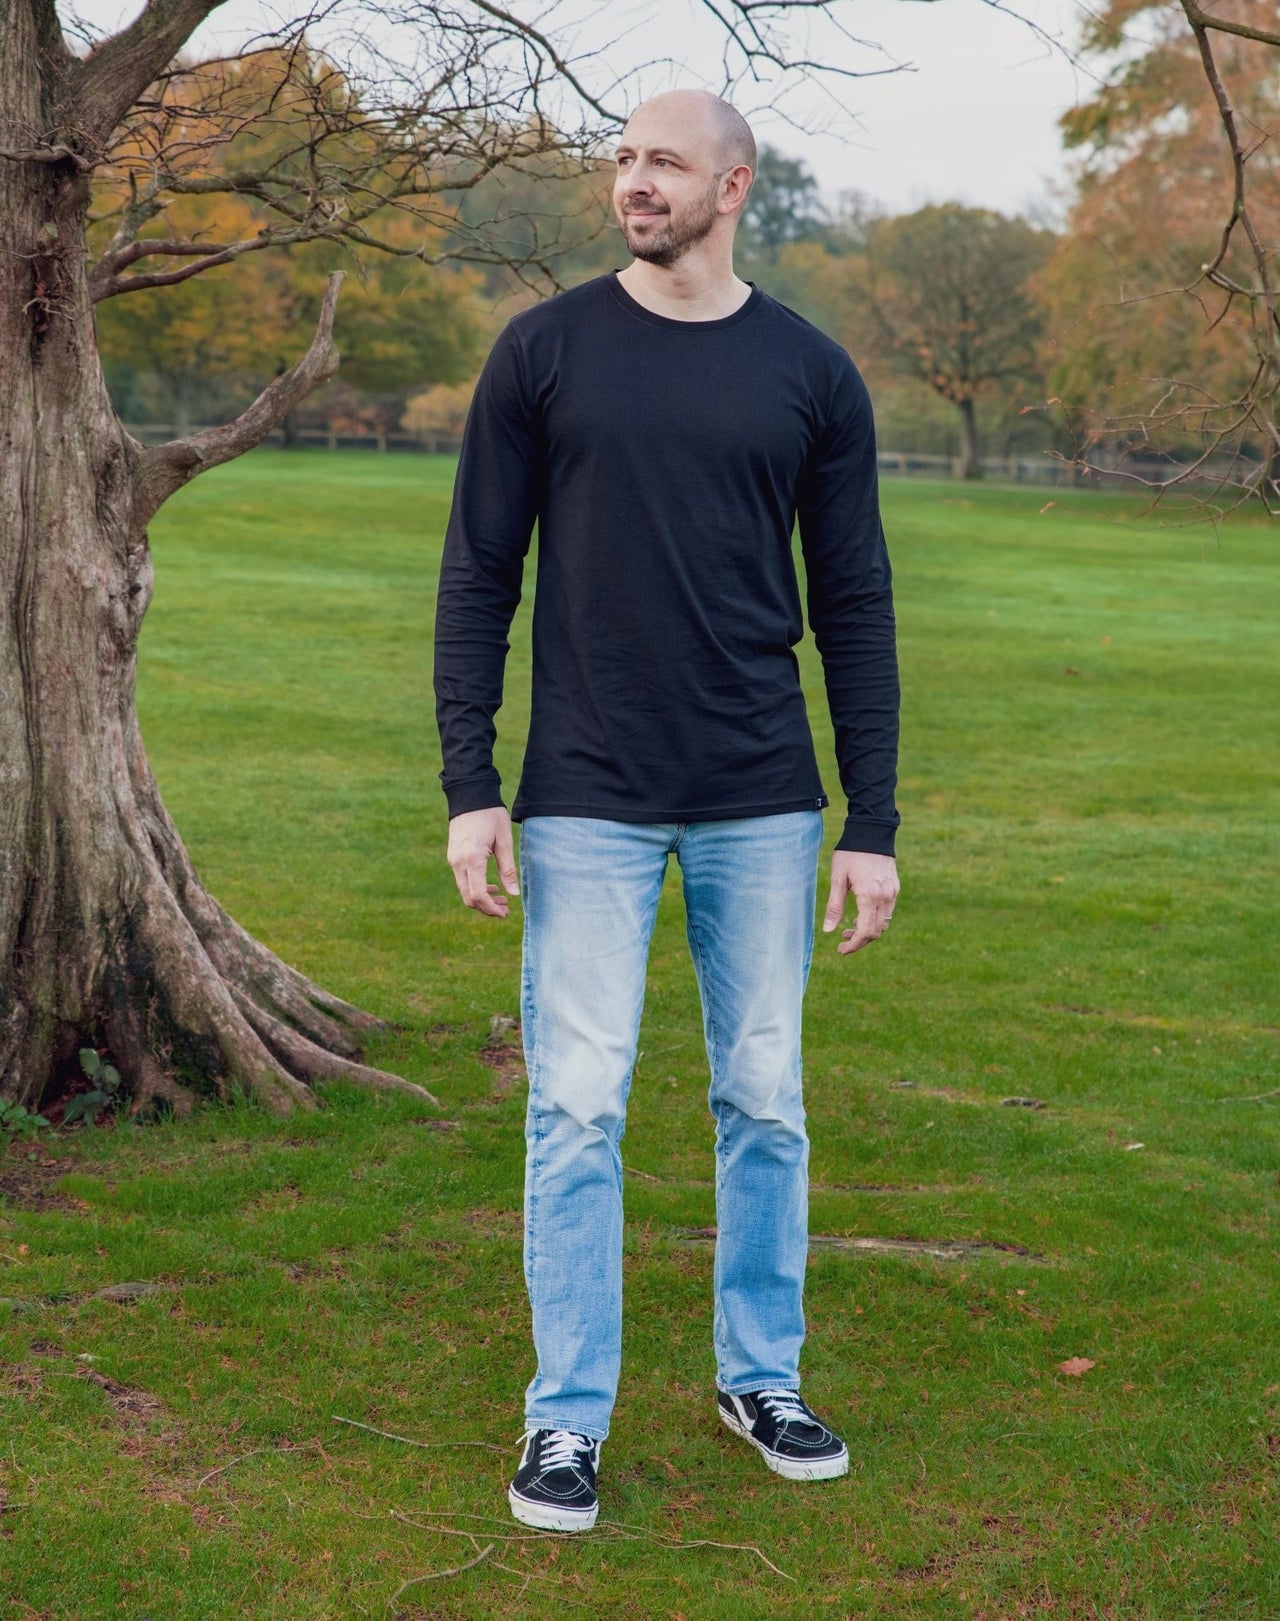 A head to toe shot of a tall athletic guy in a park wearing a black long sleeve tall t-shirt, looking to the right